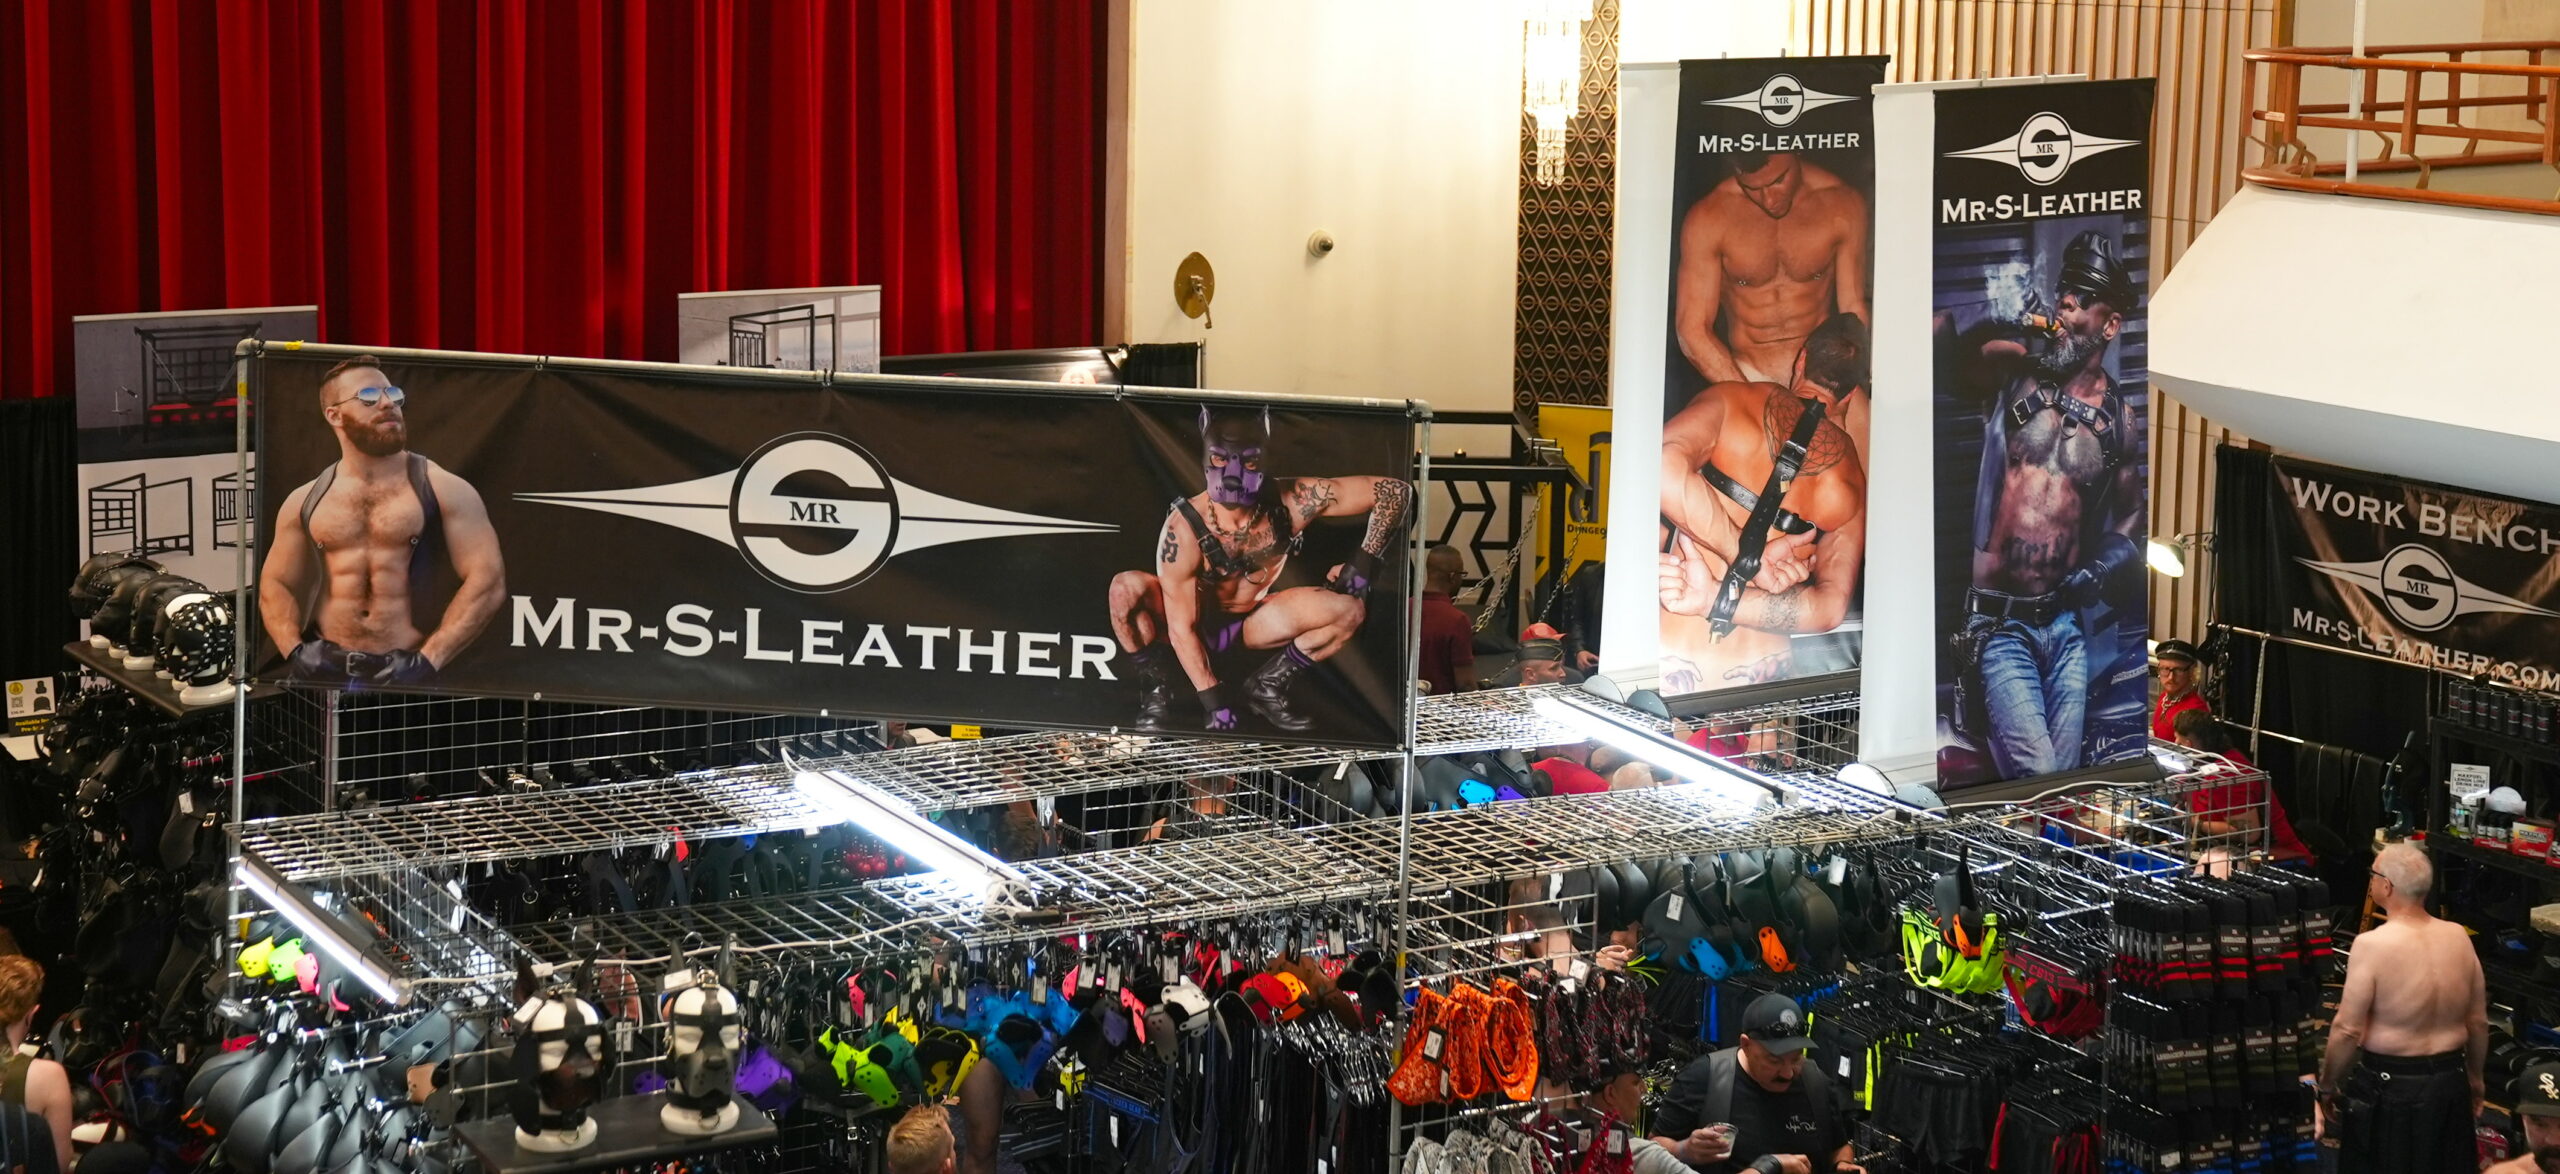 Yes, they sell leather at International Mr. Leather.